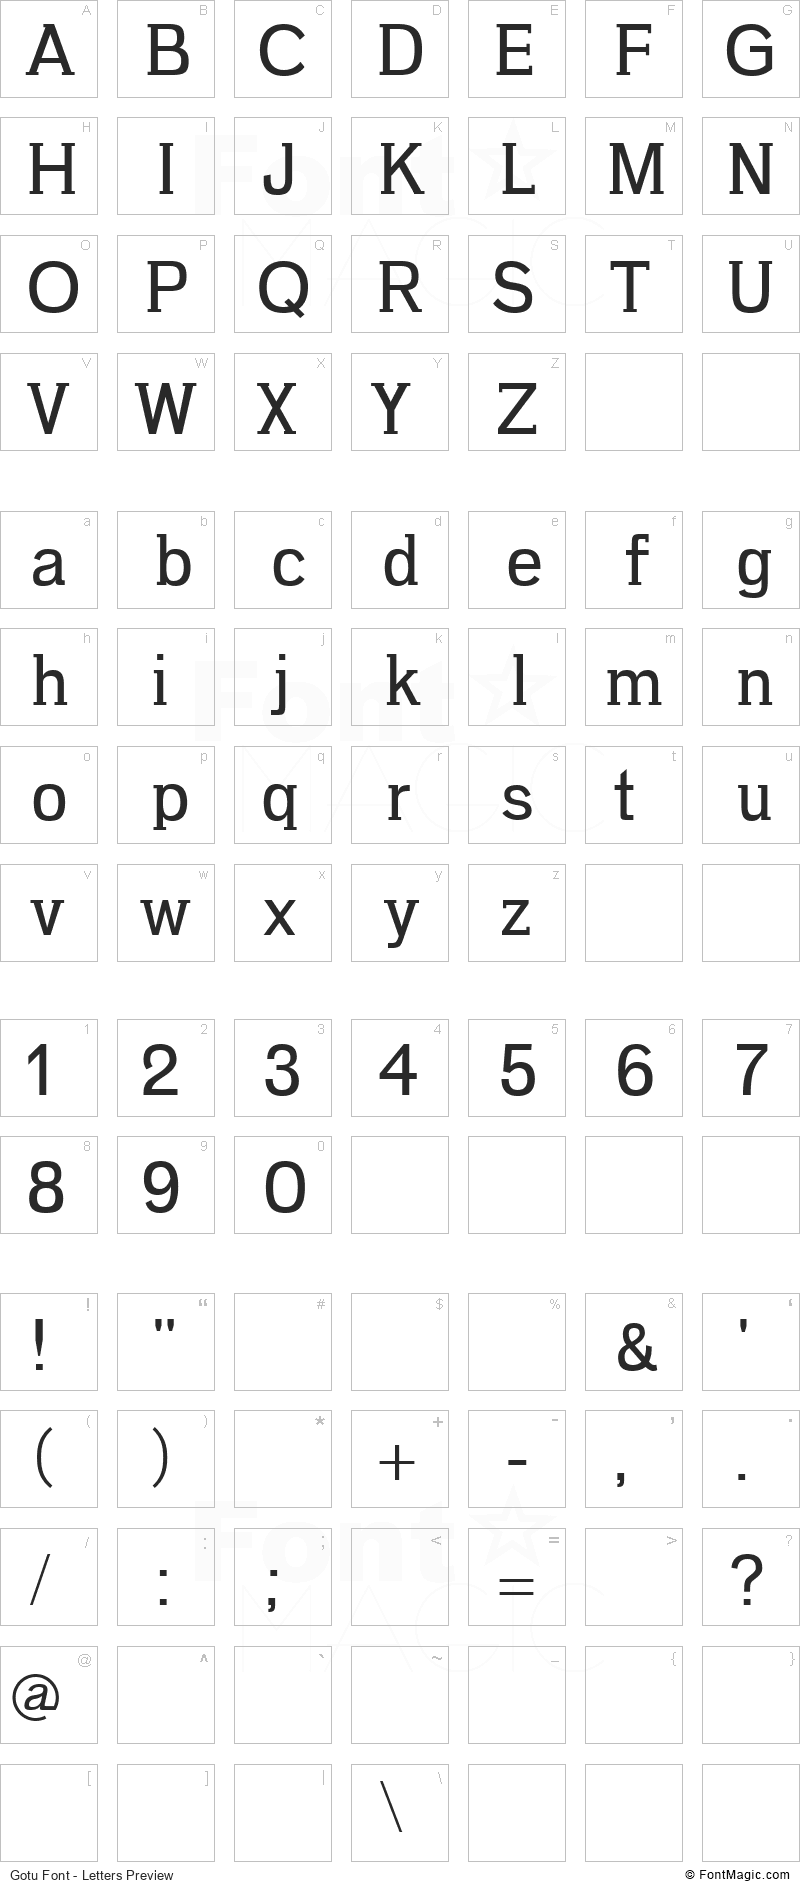 Gotu Font - All Latters Preview Chart